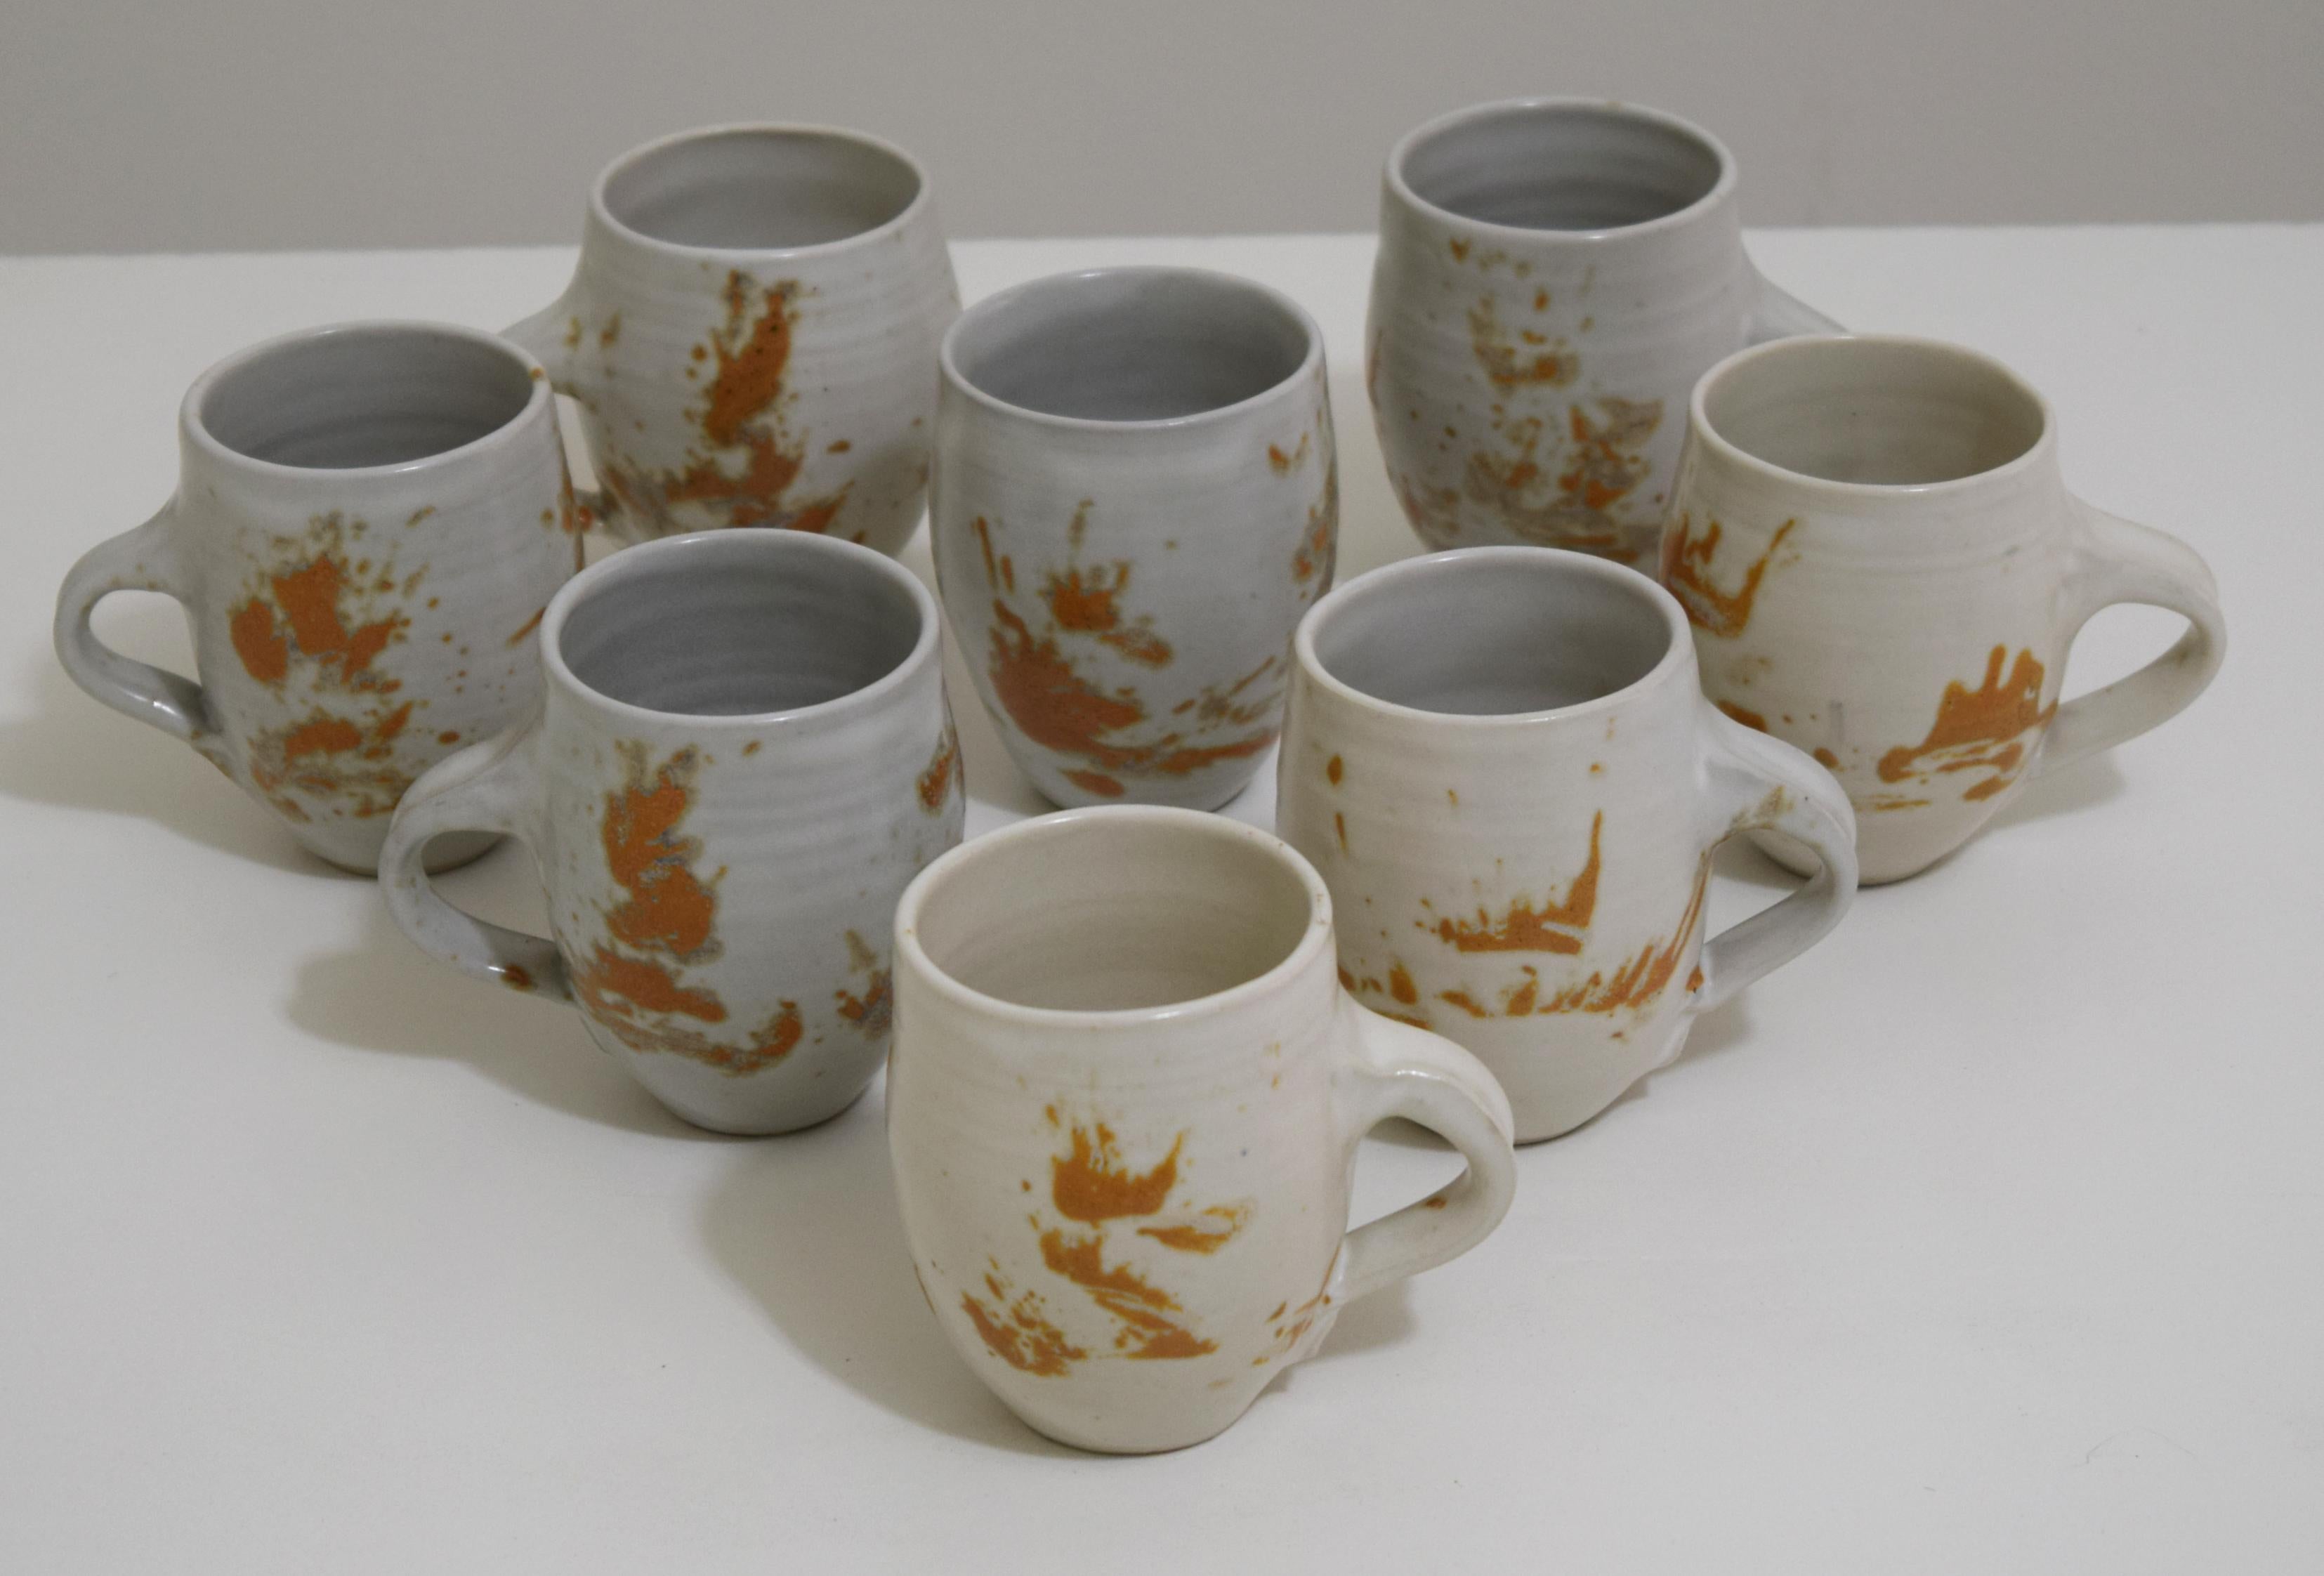 Set of 8 cups each signed by Otto & Vivika Heino. Produced circa 1965, all 8 coffee cups are in excellent condition and were displayed, not used.
3